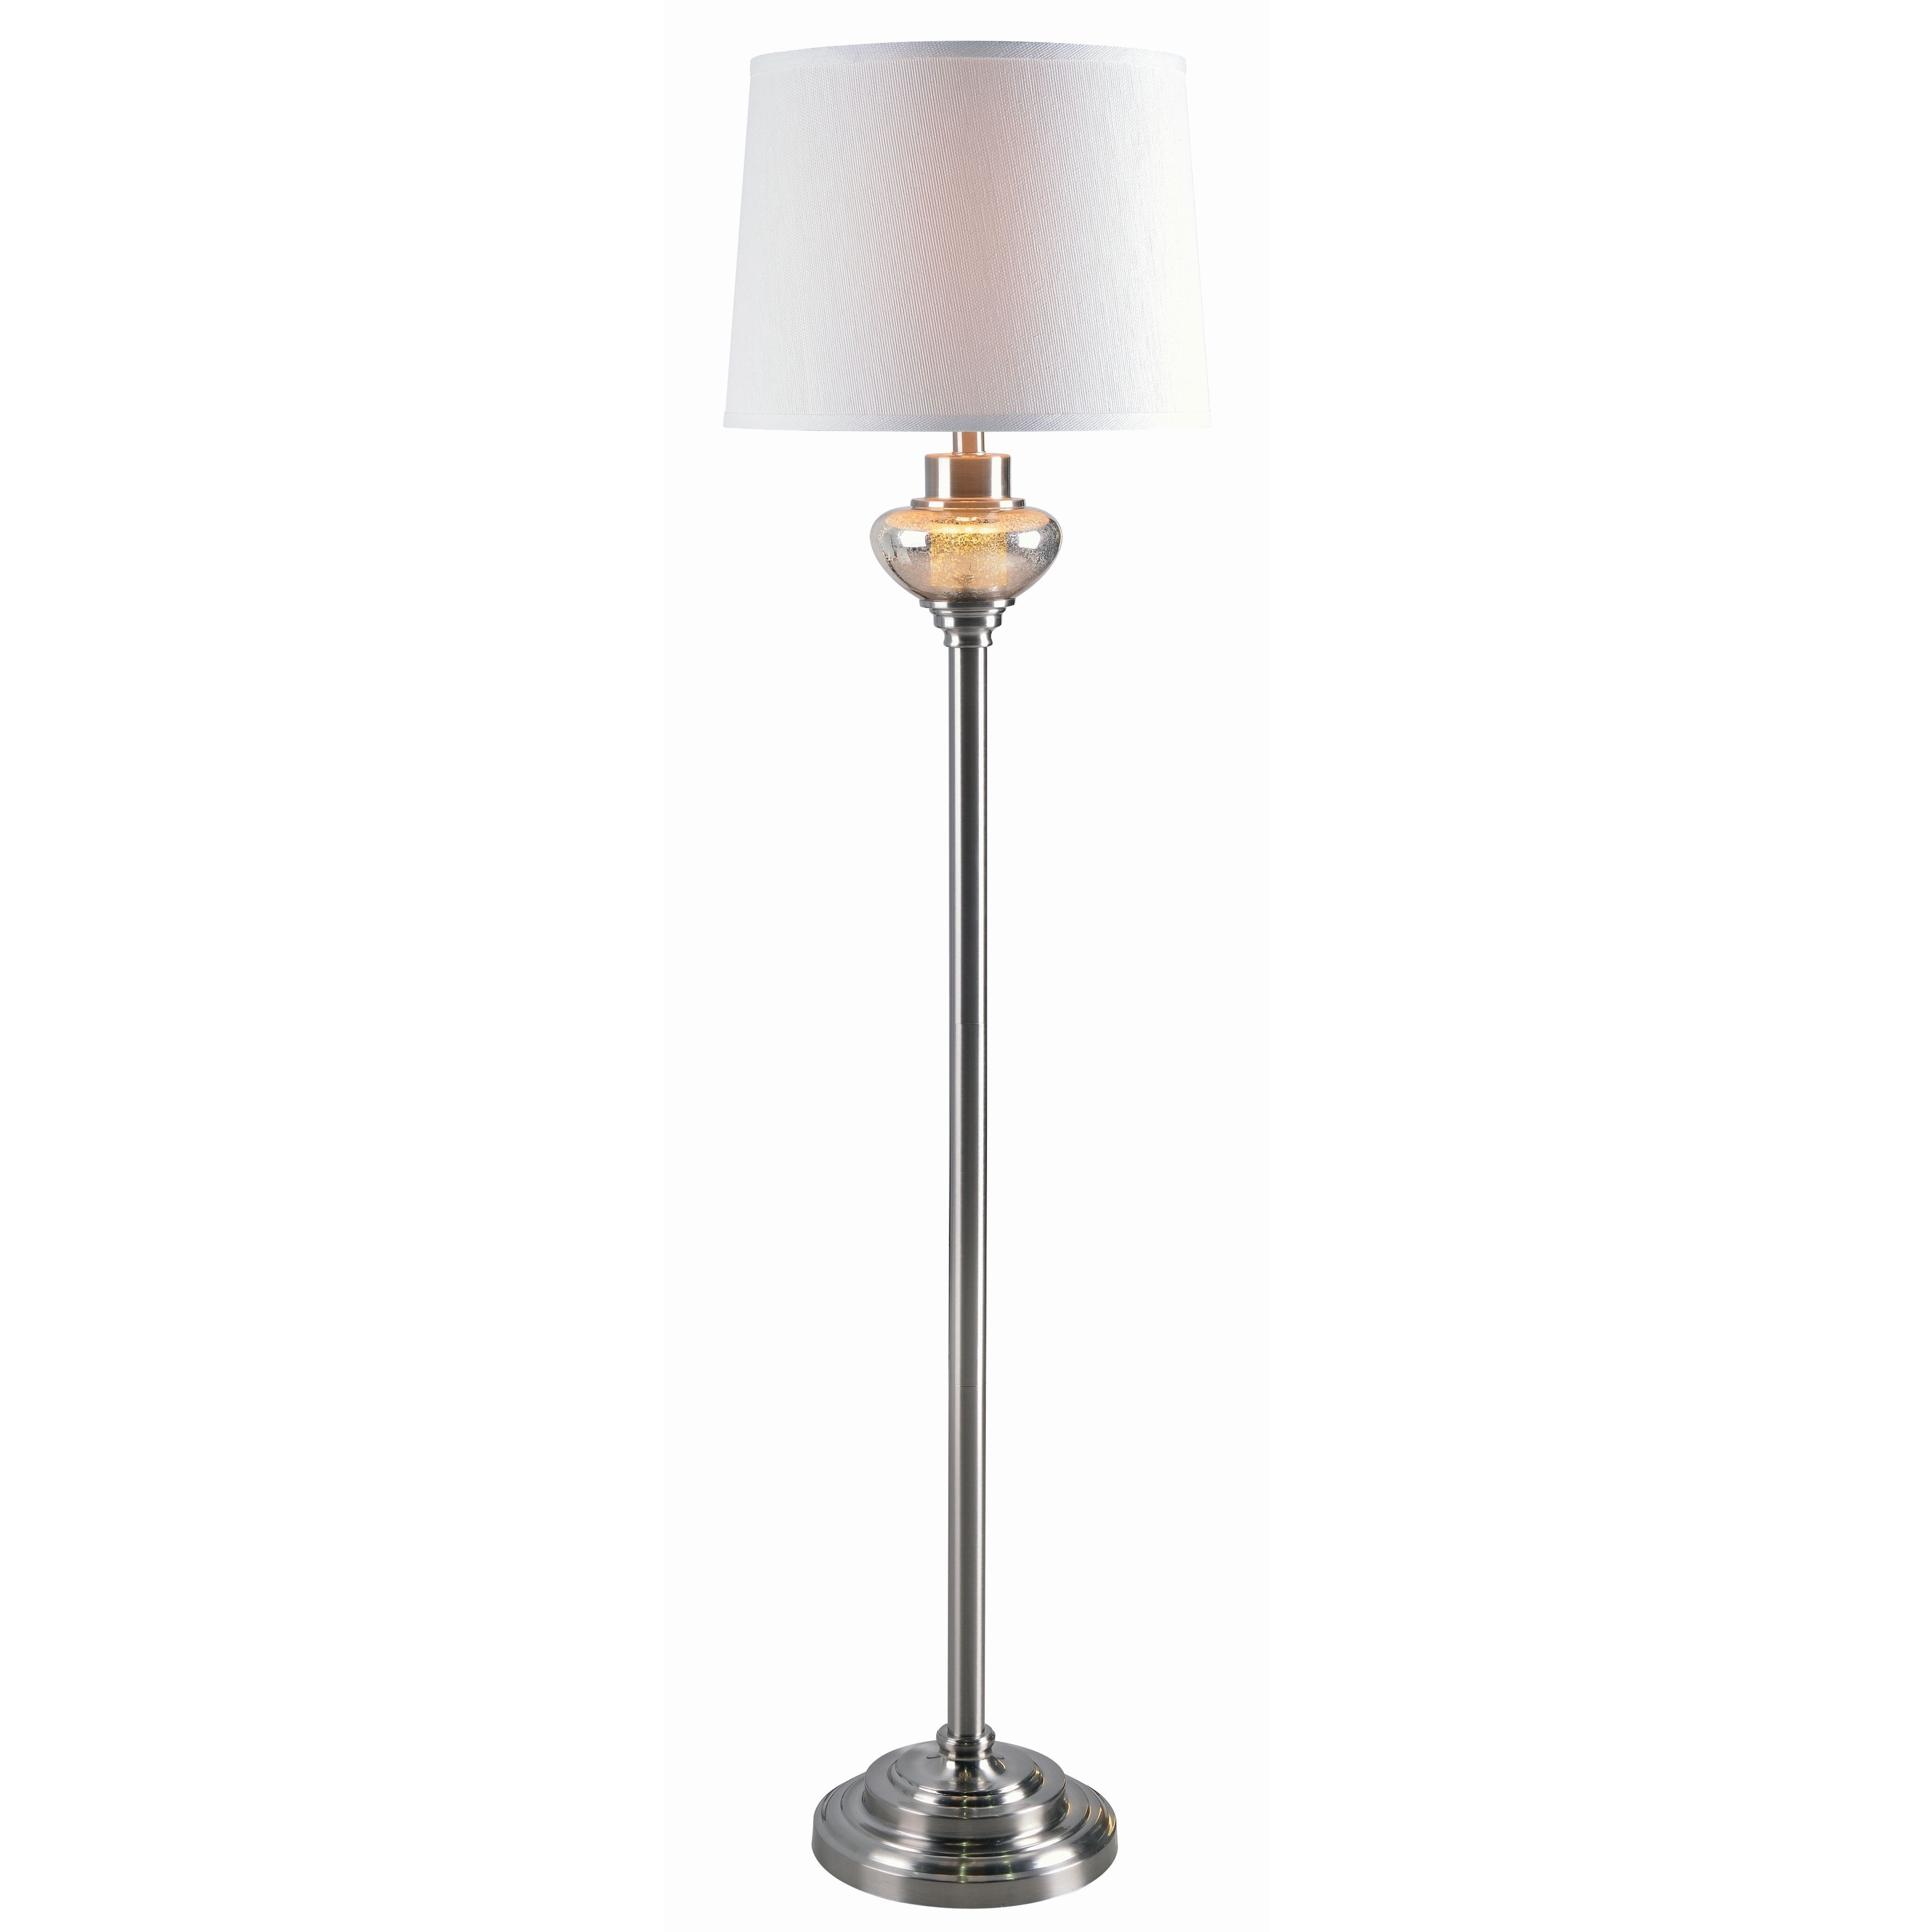 Design Craft Capone Brushed Steel 58 Inch Floor Lamp Capone pertaining to dimensions 3500 X 3500